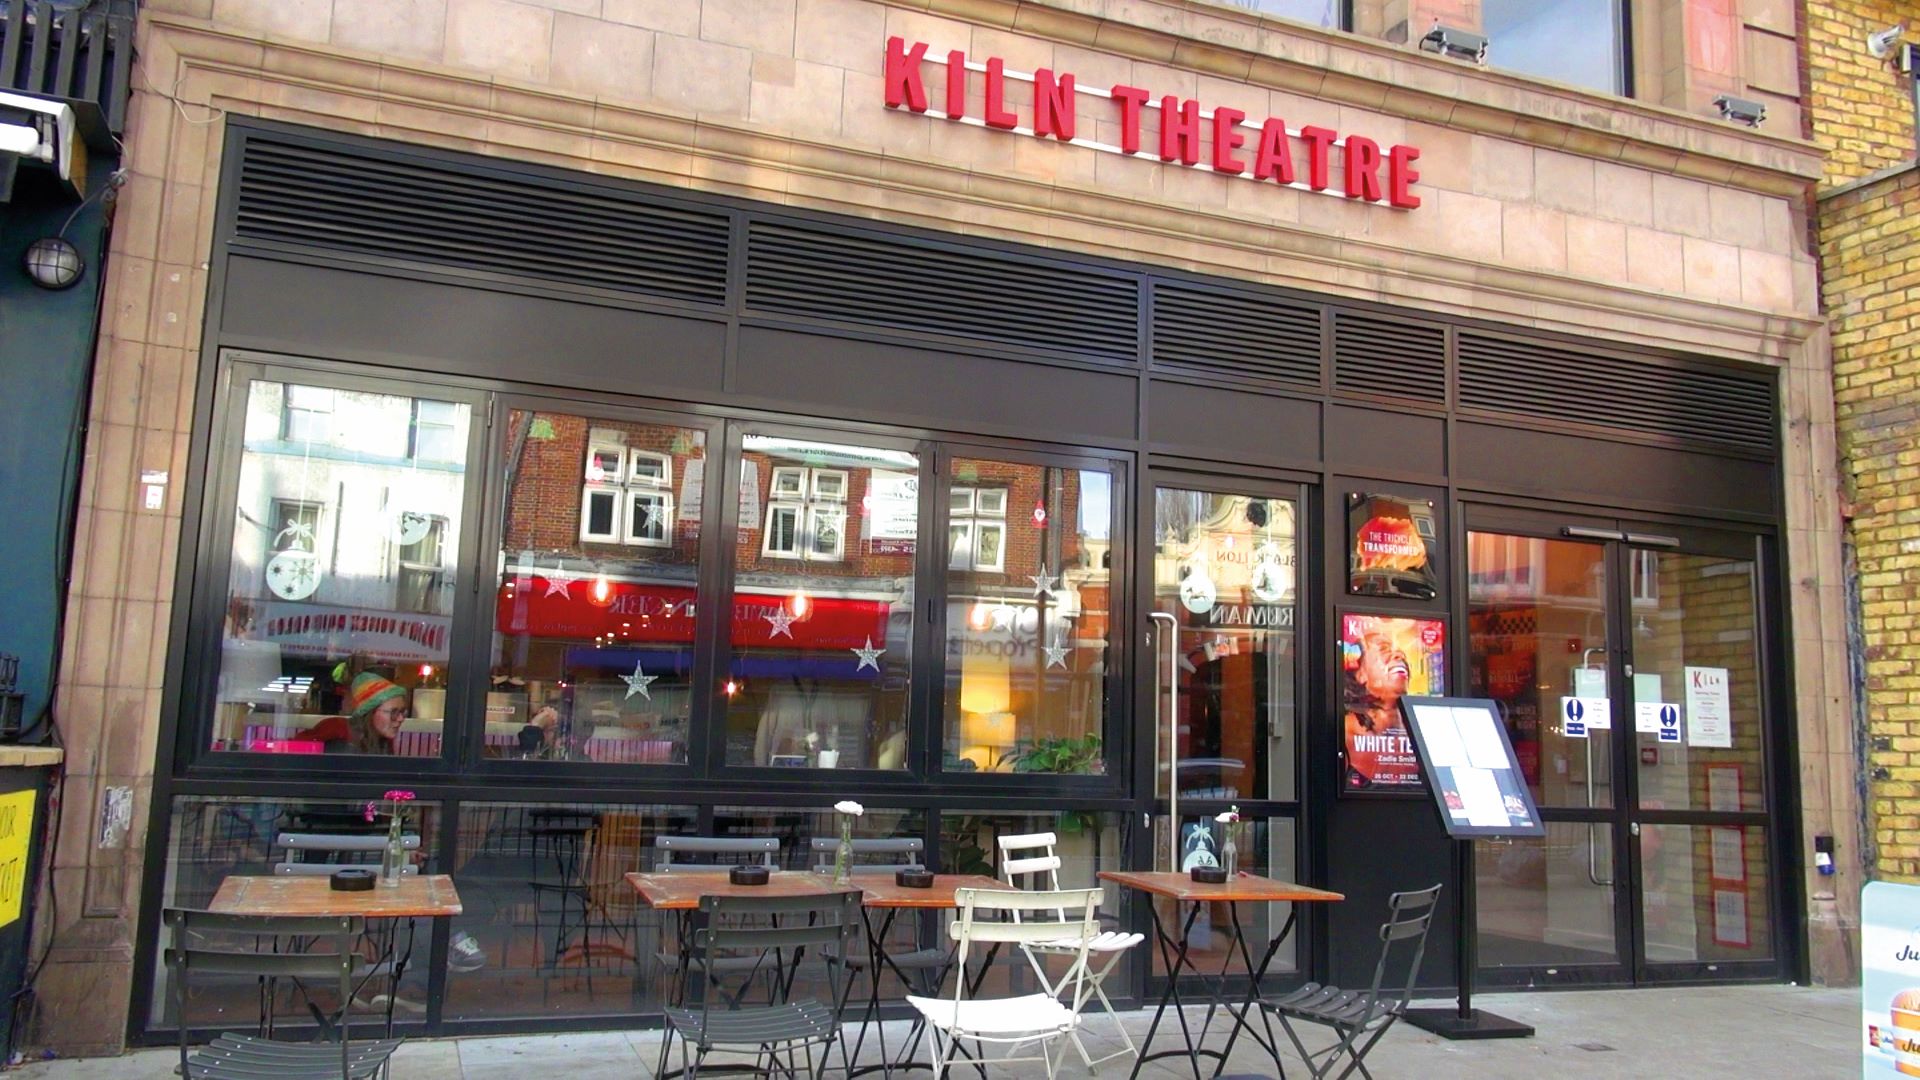 The front of the Kiln Theatre